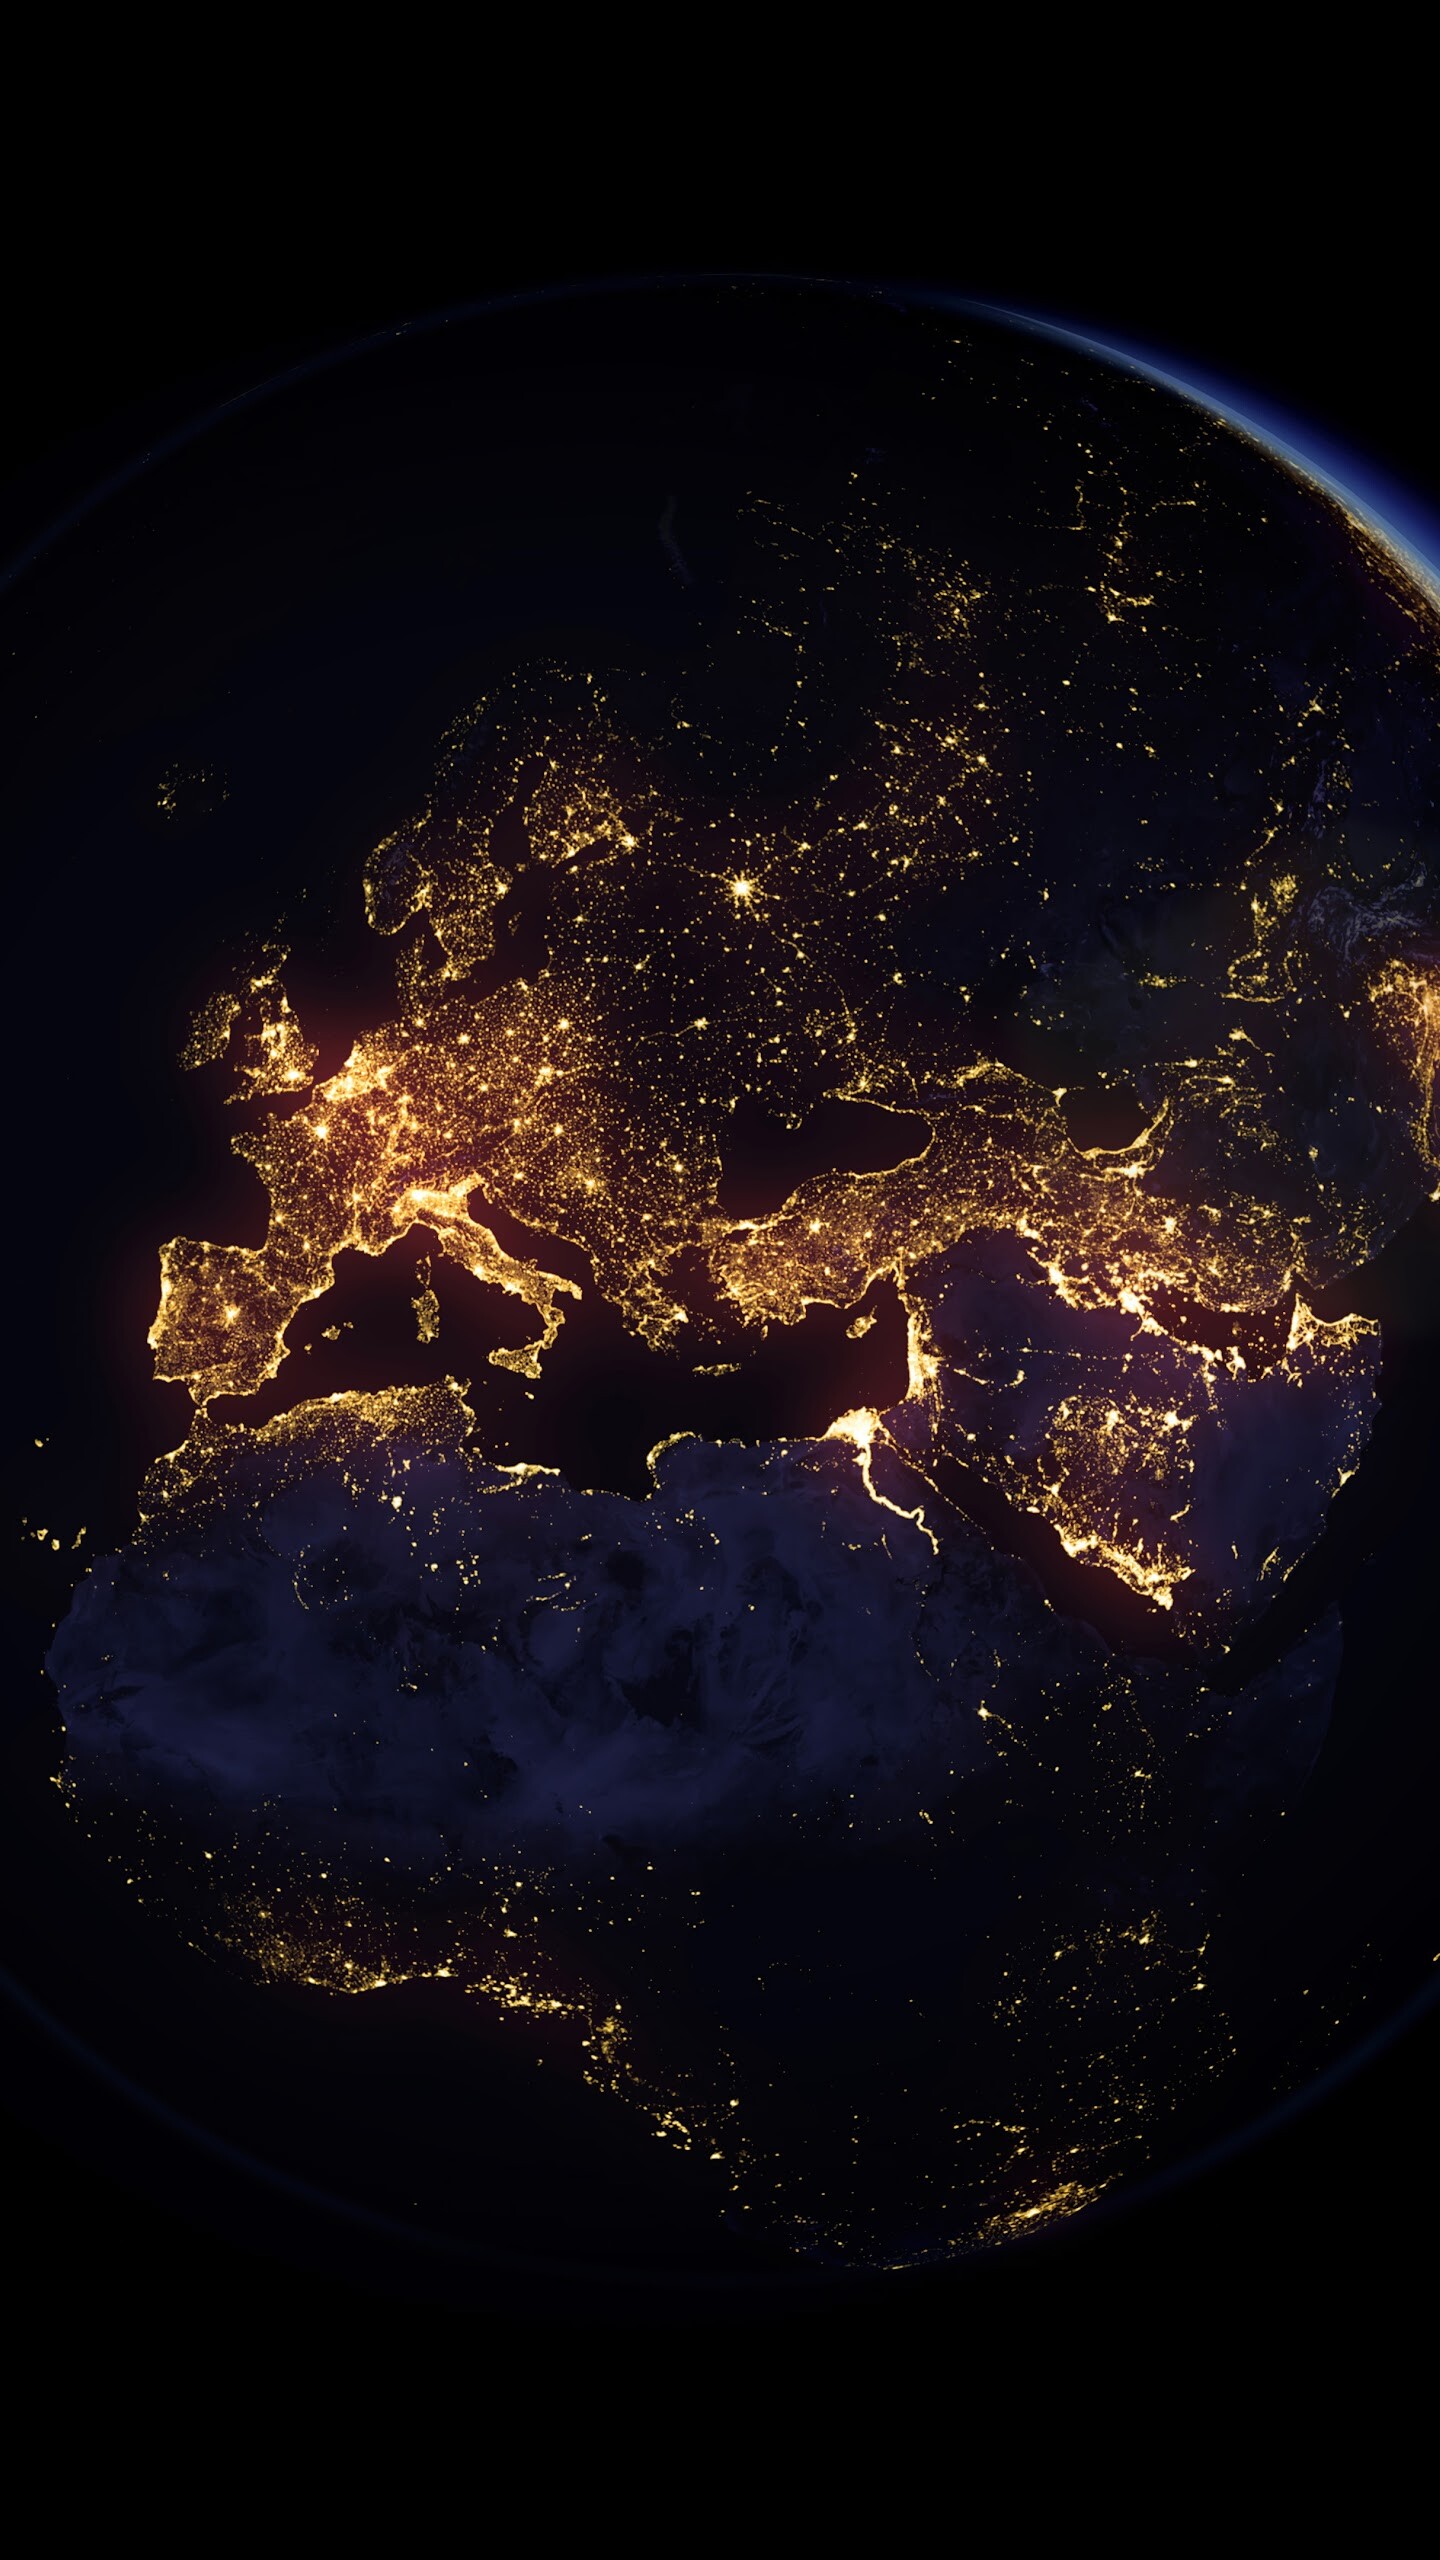 Earth at Night: Planet, Space, Europe, Africa, Constellation of lights. 1440x2560 HD Wallpaper.